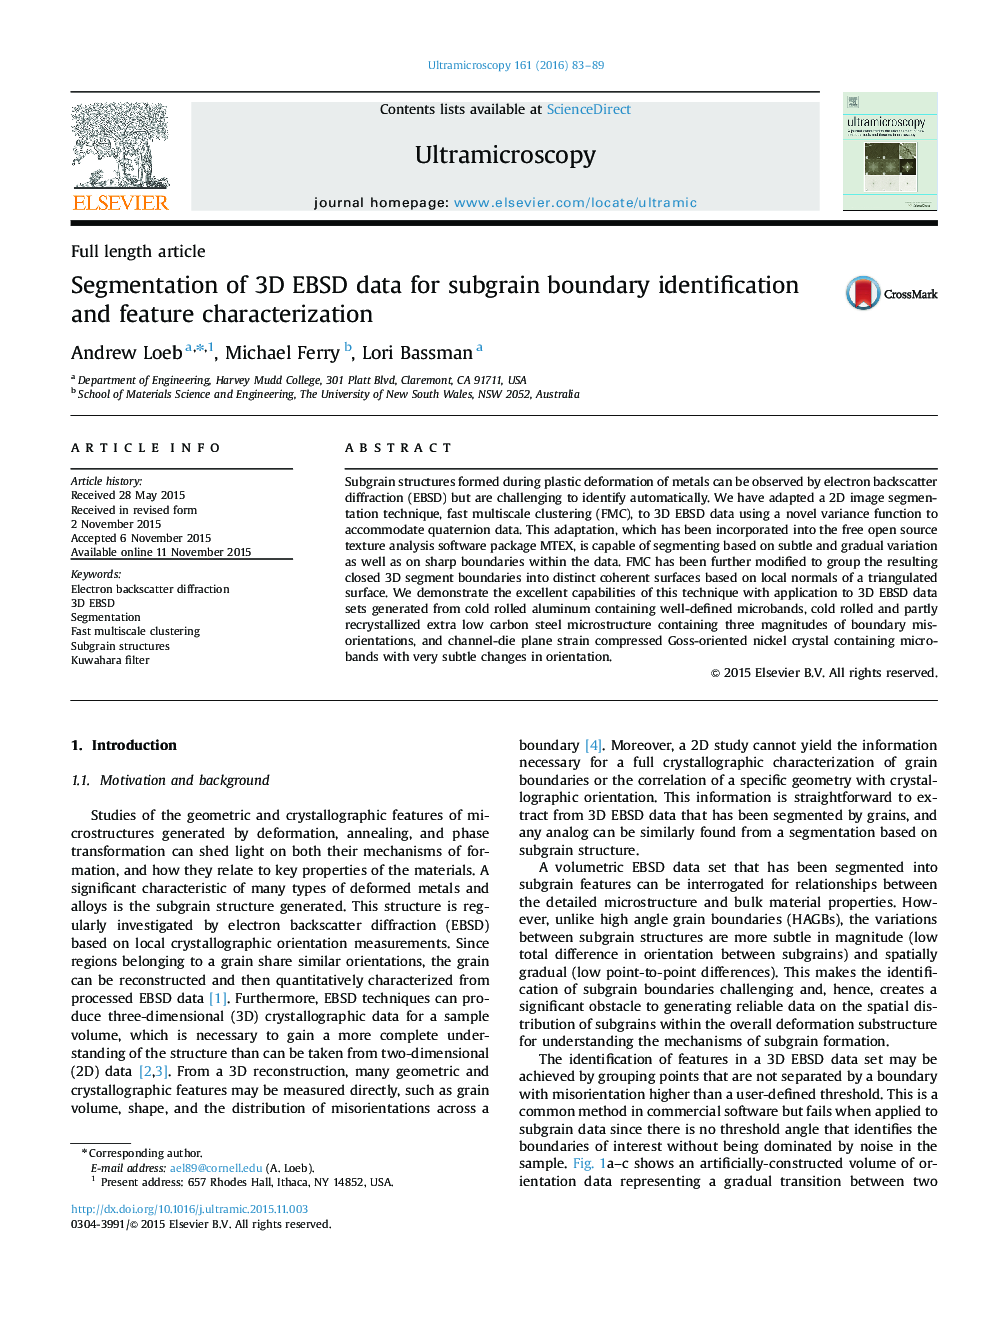 Segmentation of 3D EBSD data for subgrain boundary identification and feature characterization